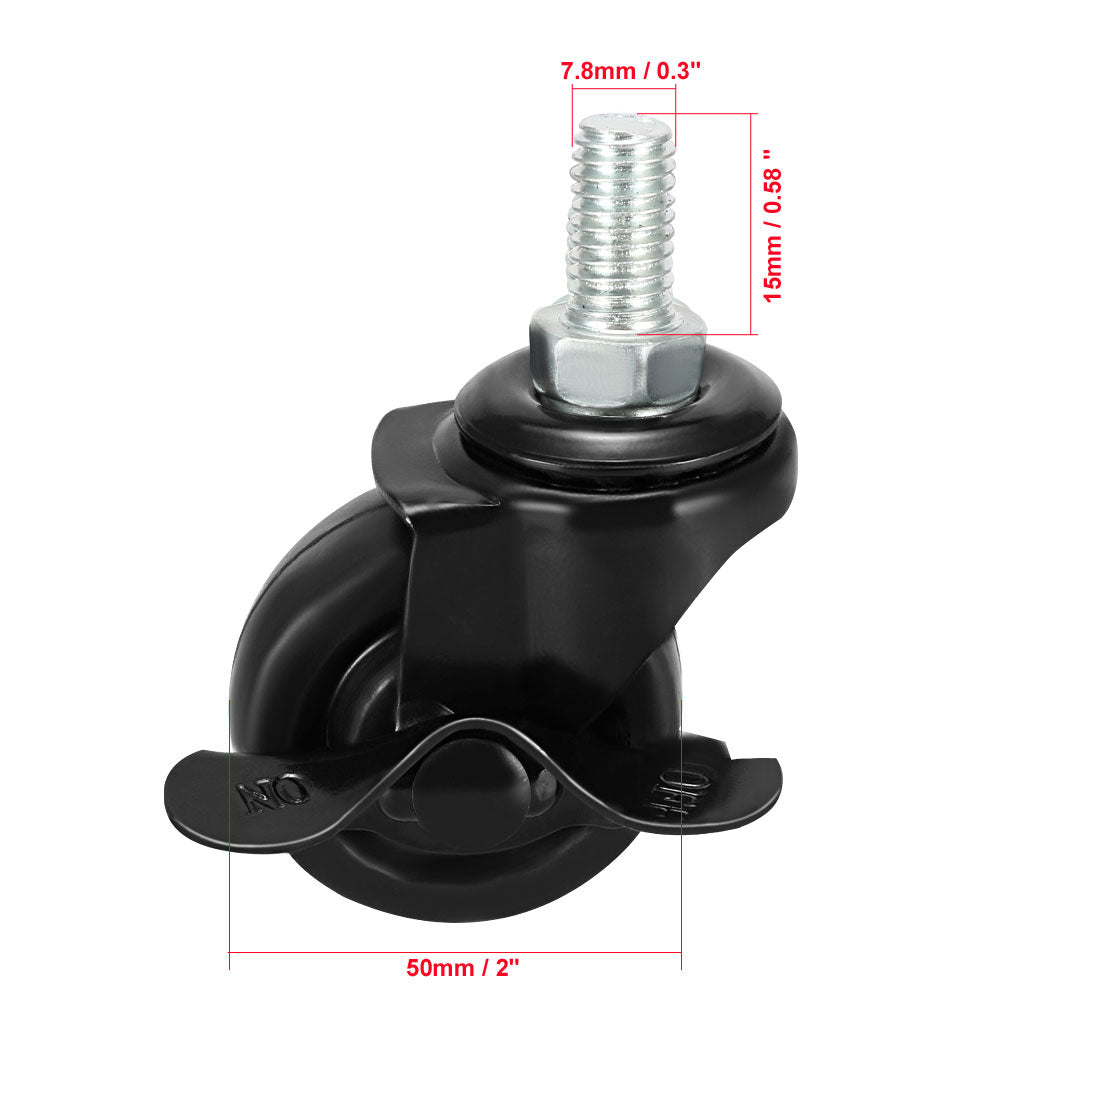 Uxcell Uxcell Swivel Casters 2 Inch Solid Rubber 360 Degree M8 x 15mm Threaded Caster Wheels with Brake Black 44lb Capacity Each , 8 Pcs